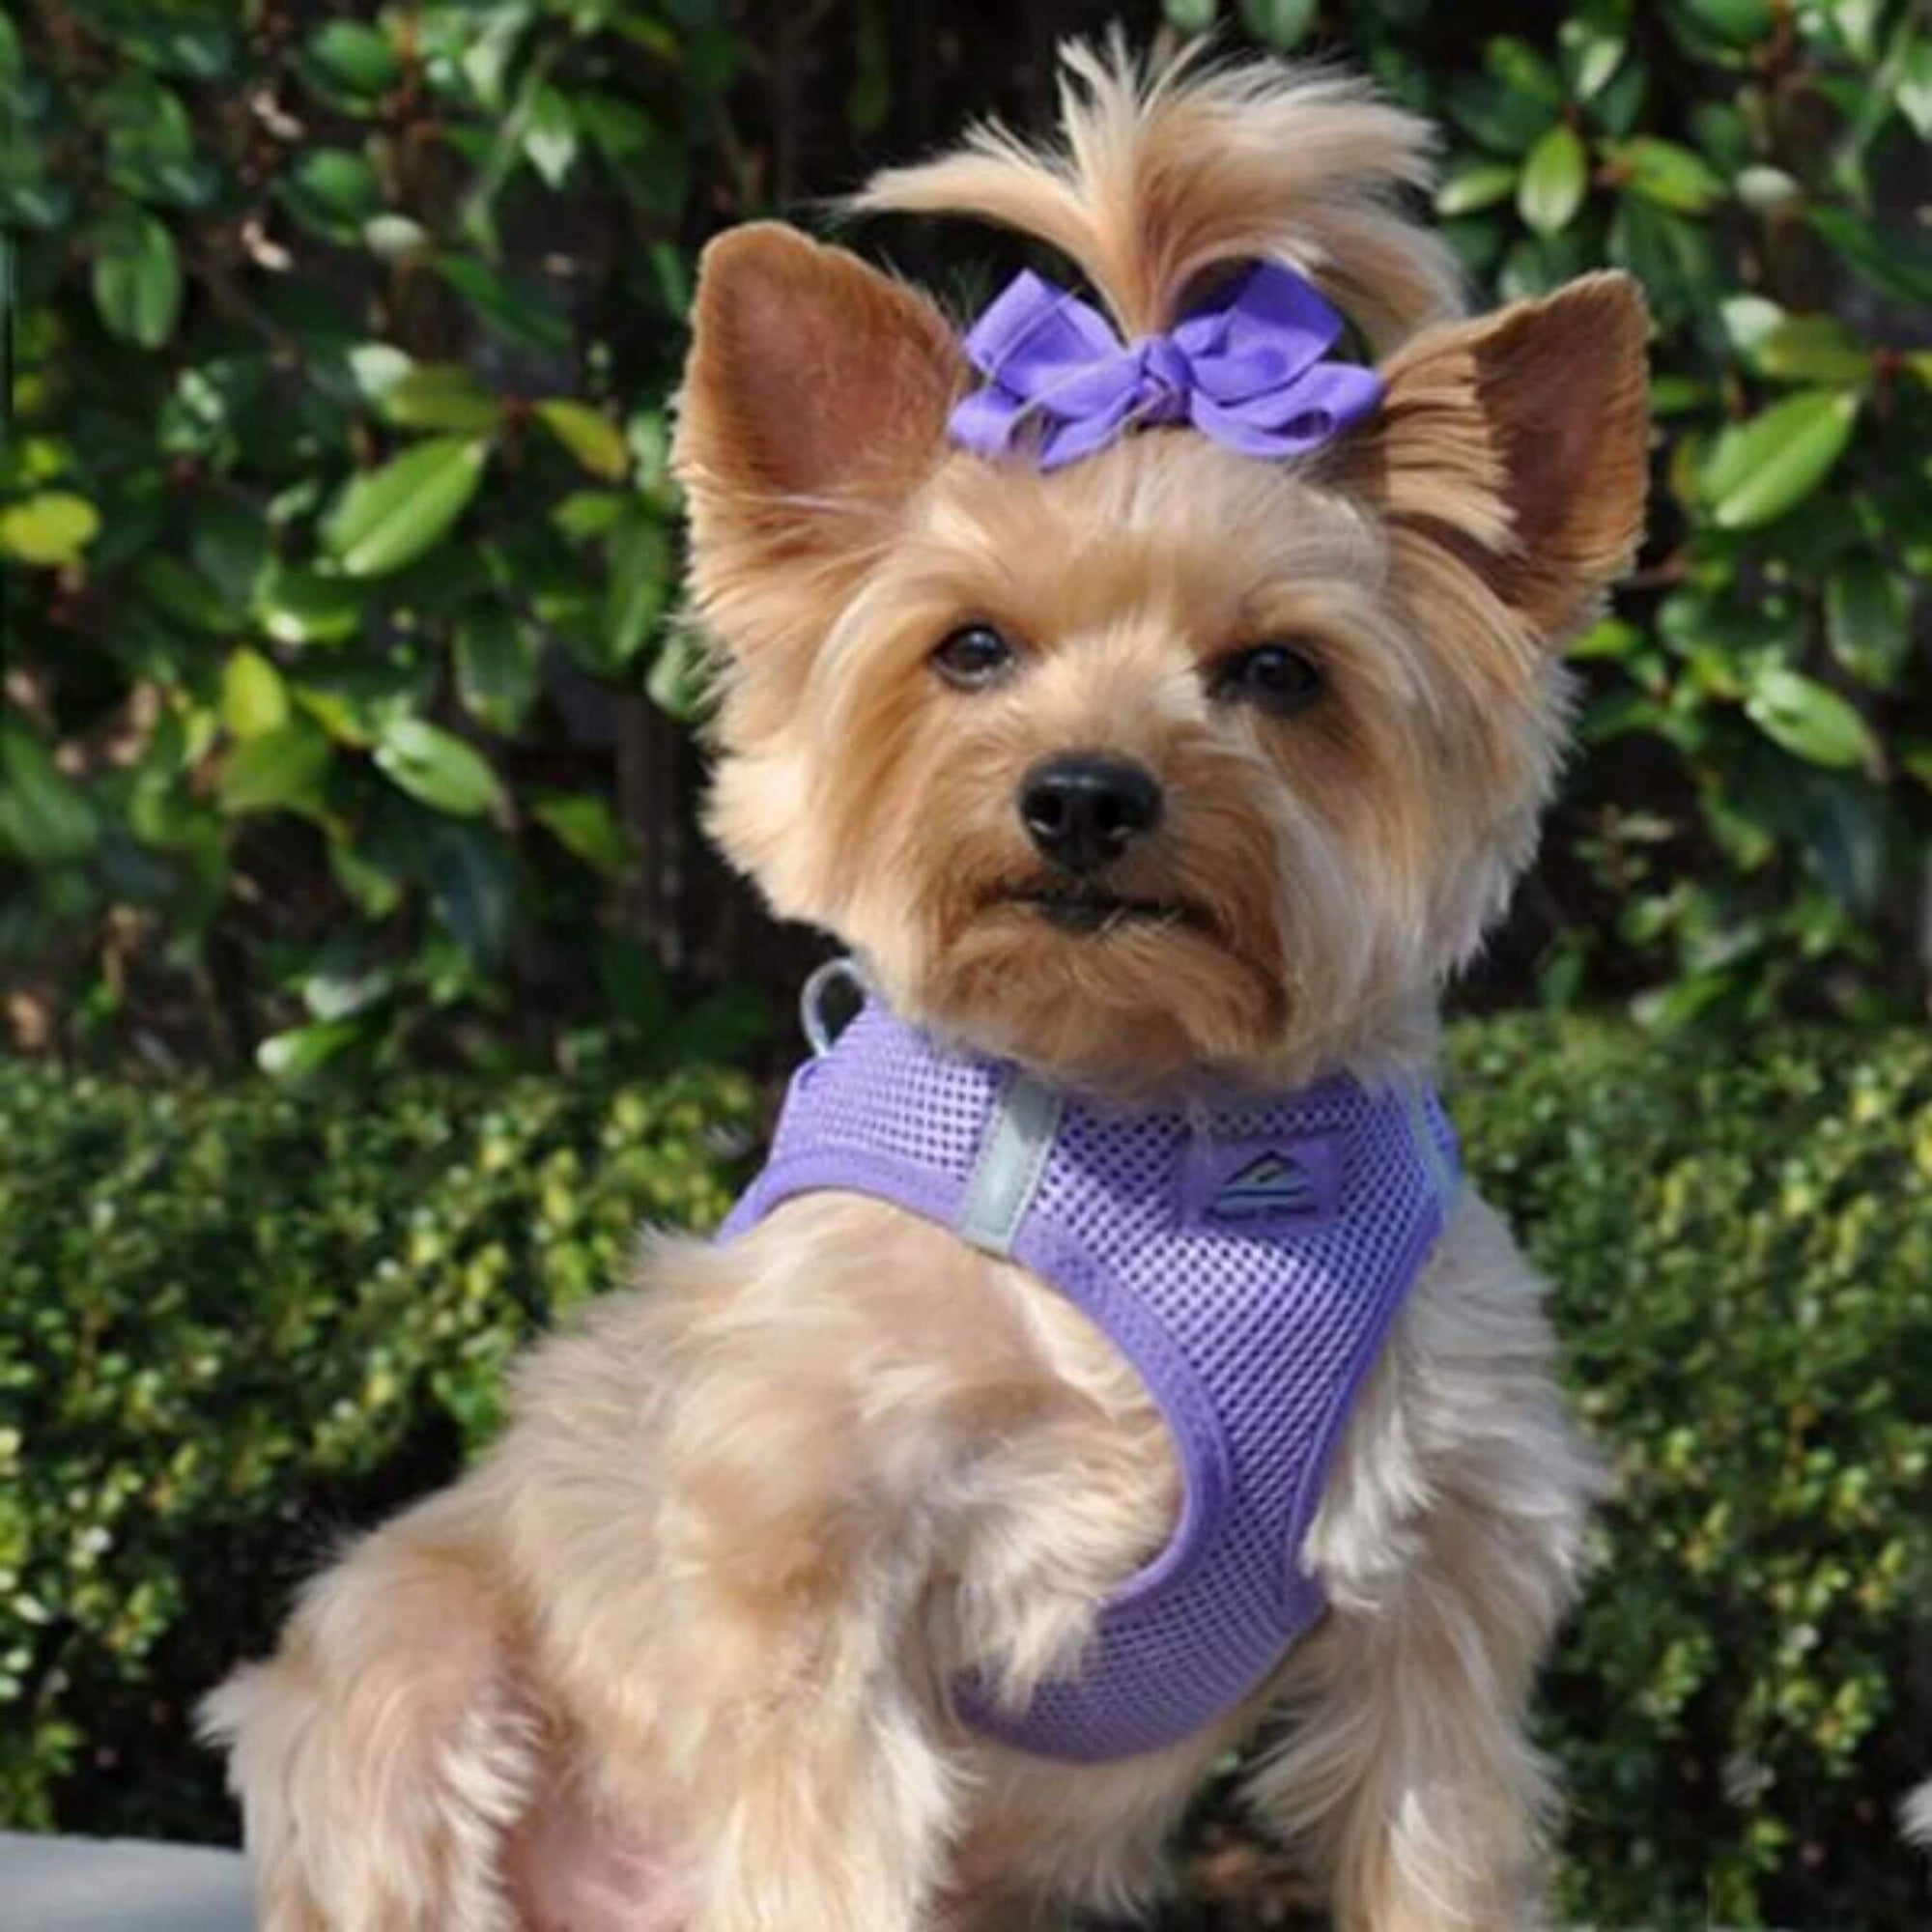 american river step in dog harness - paisley purple - yorkie